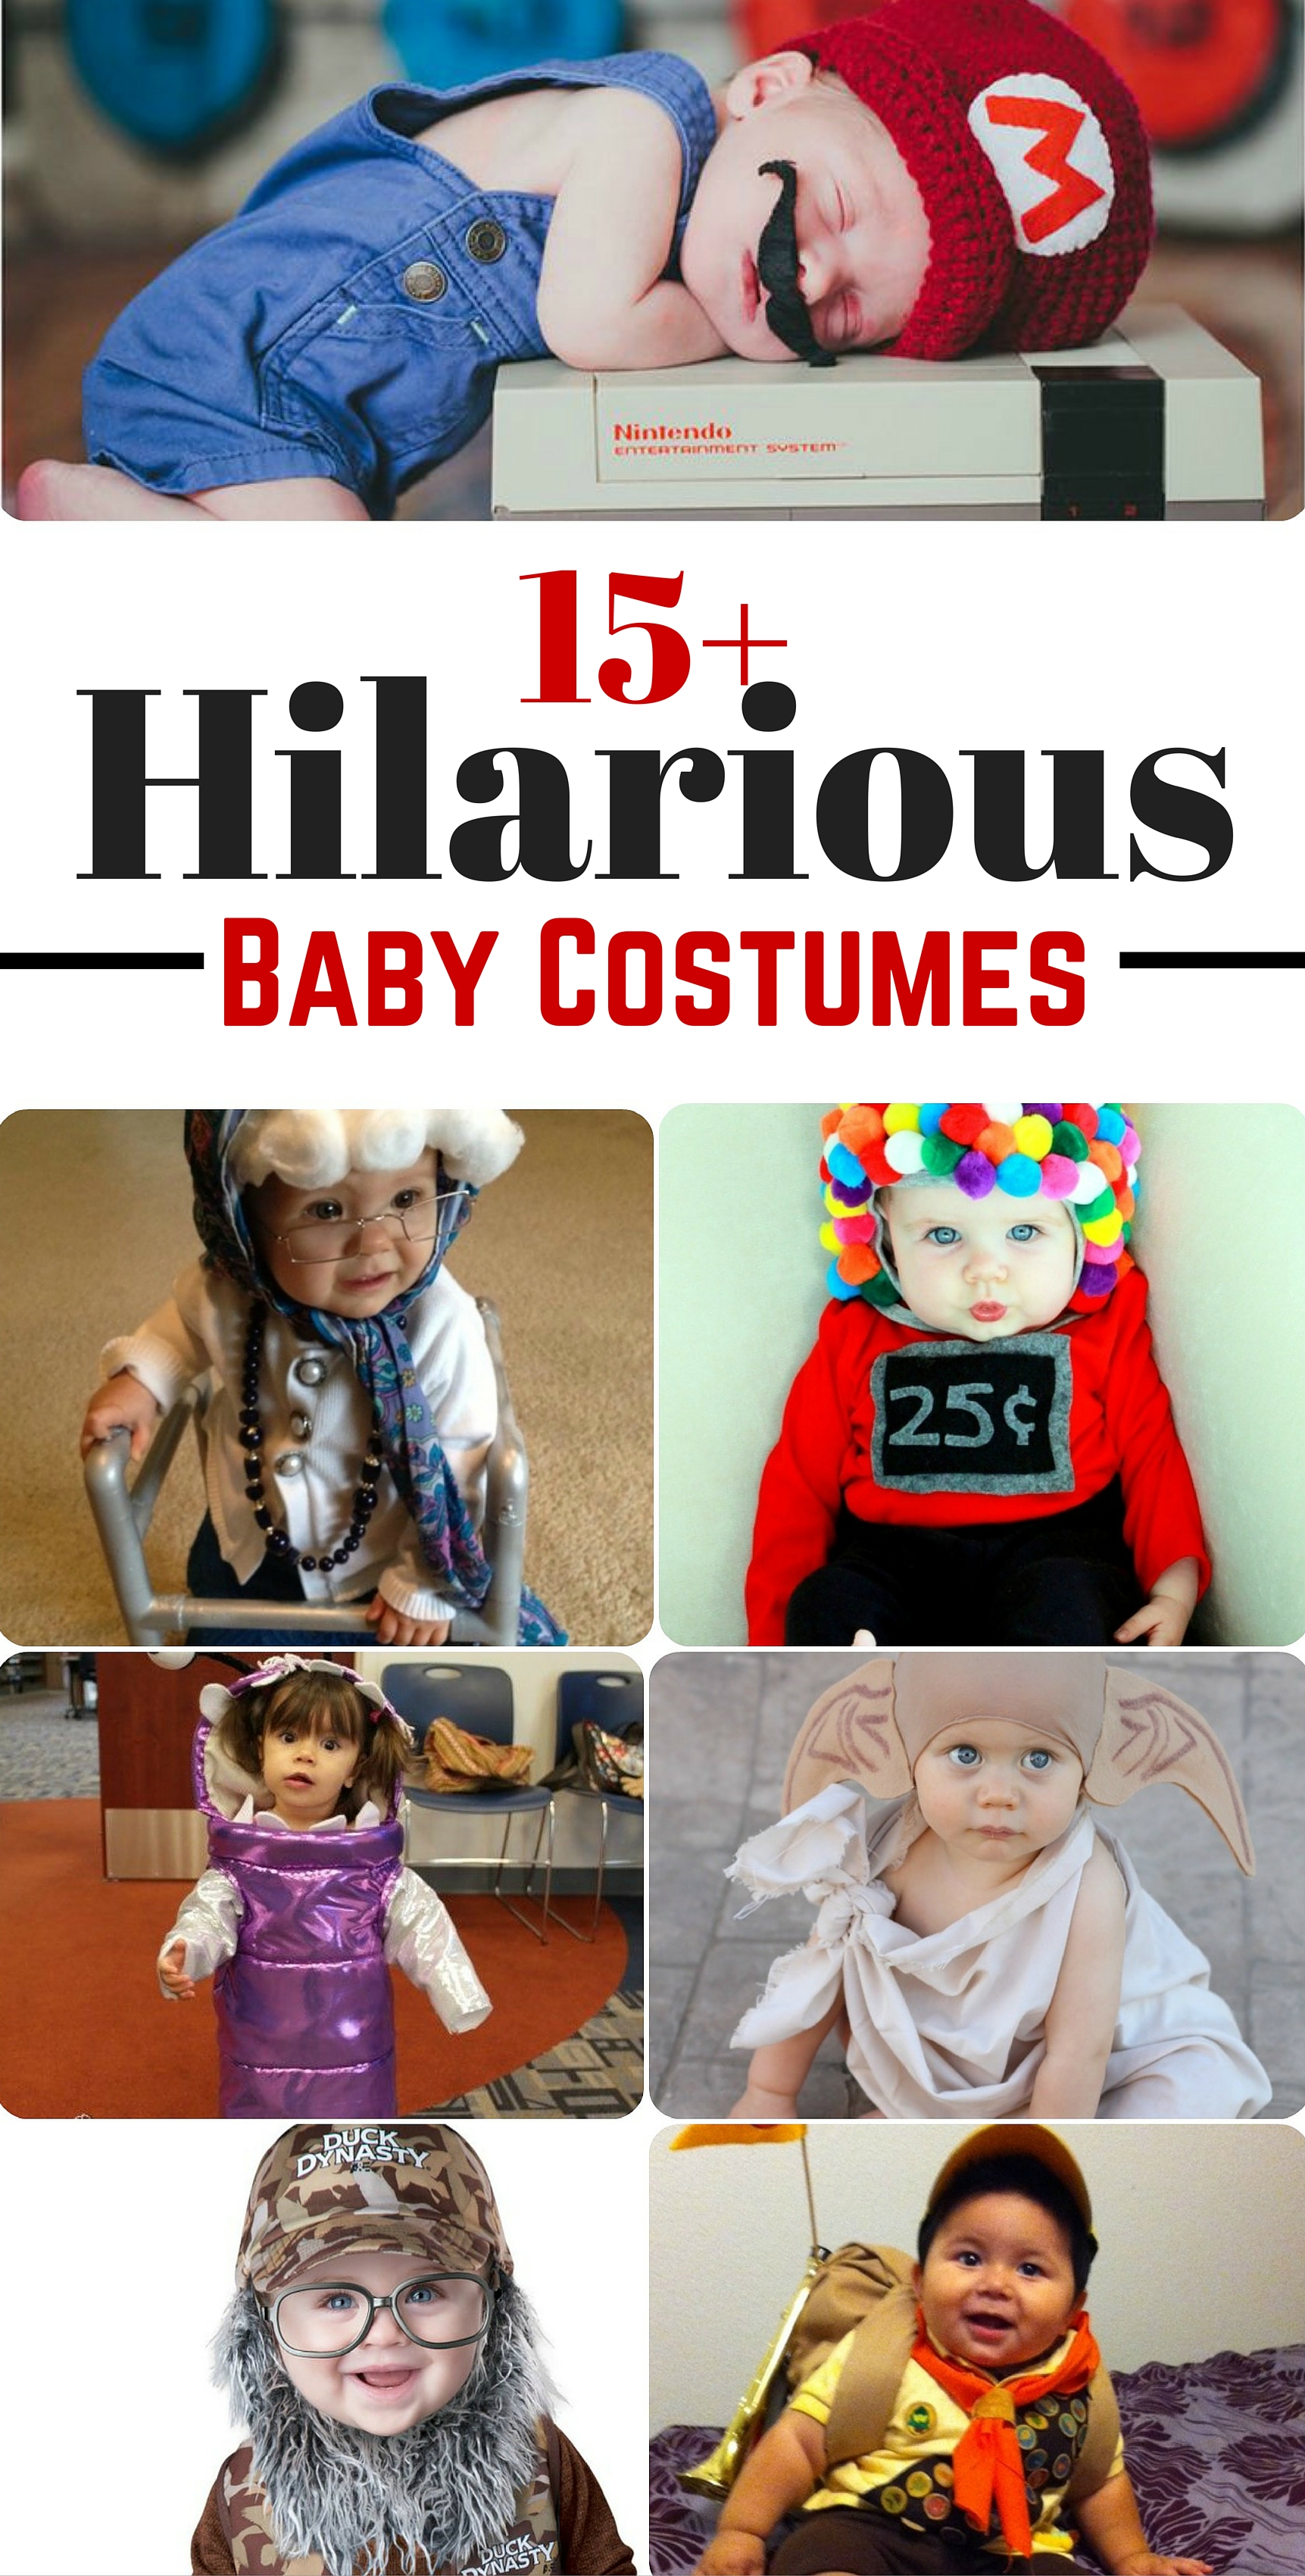 I have to dress my baby up as one of these hilarious baby costumes this year!! Too good! That granny!